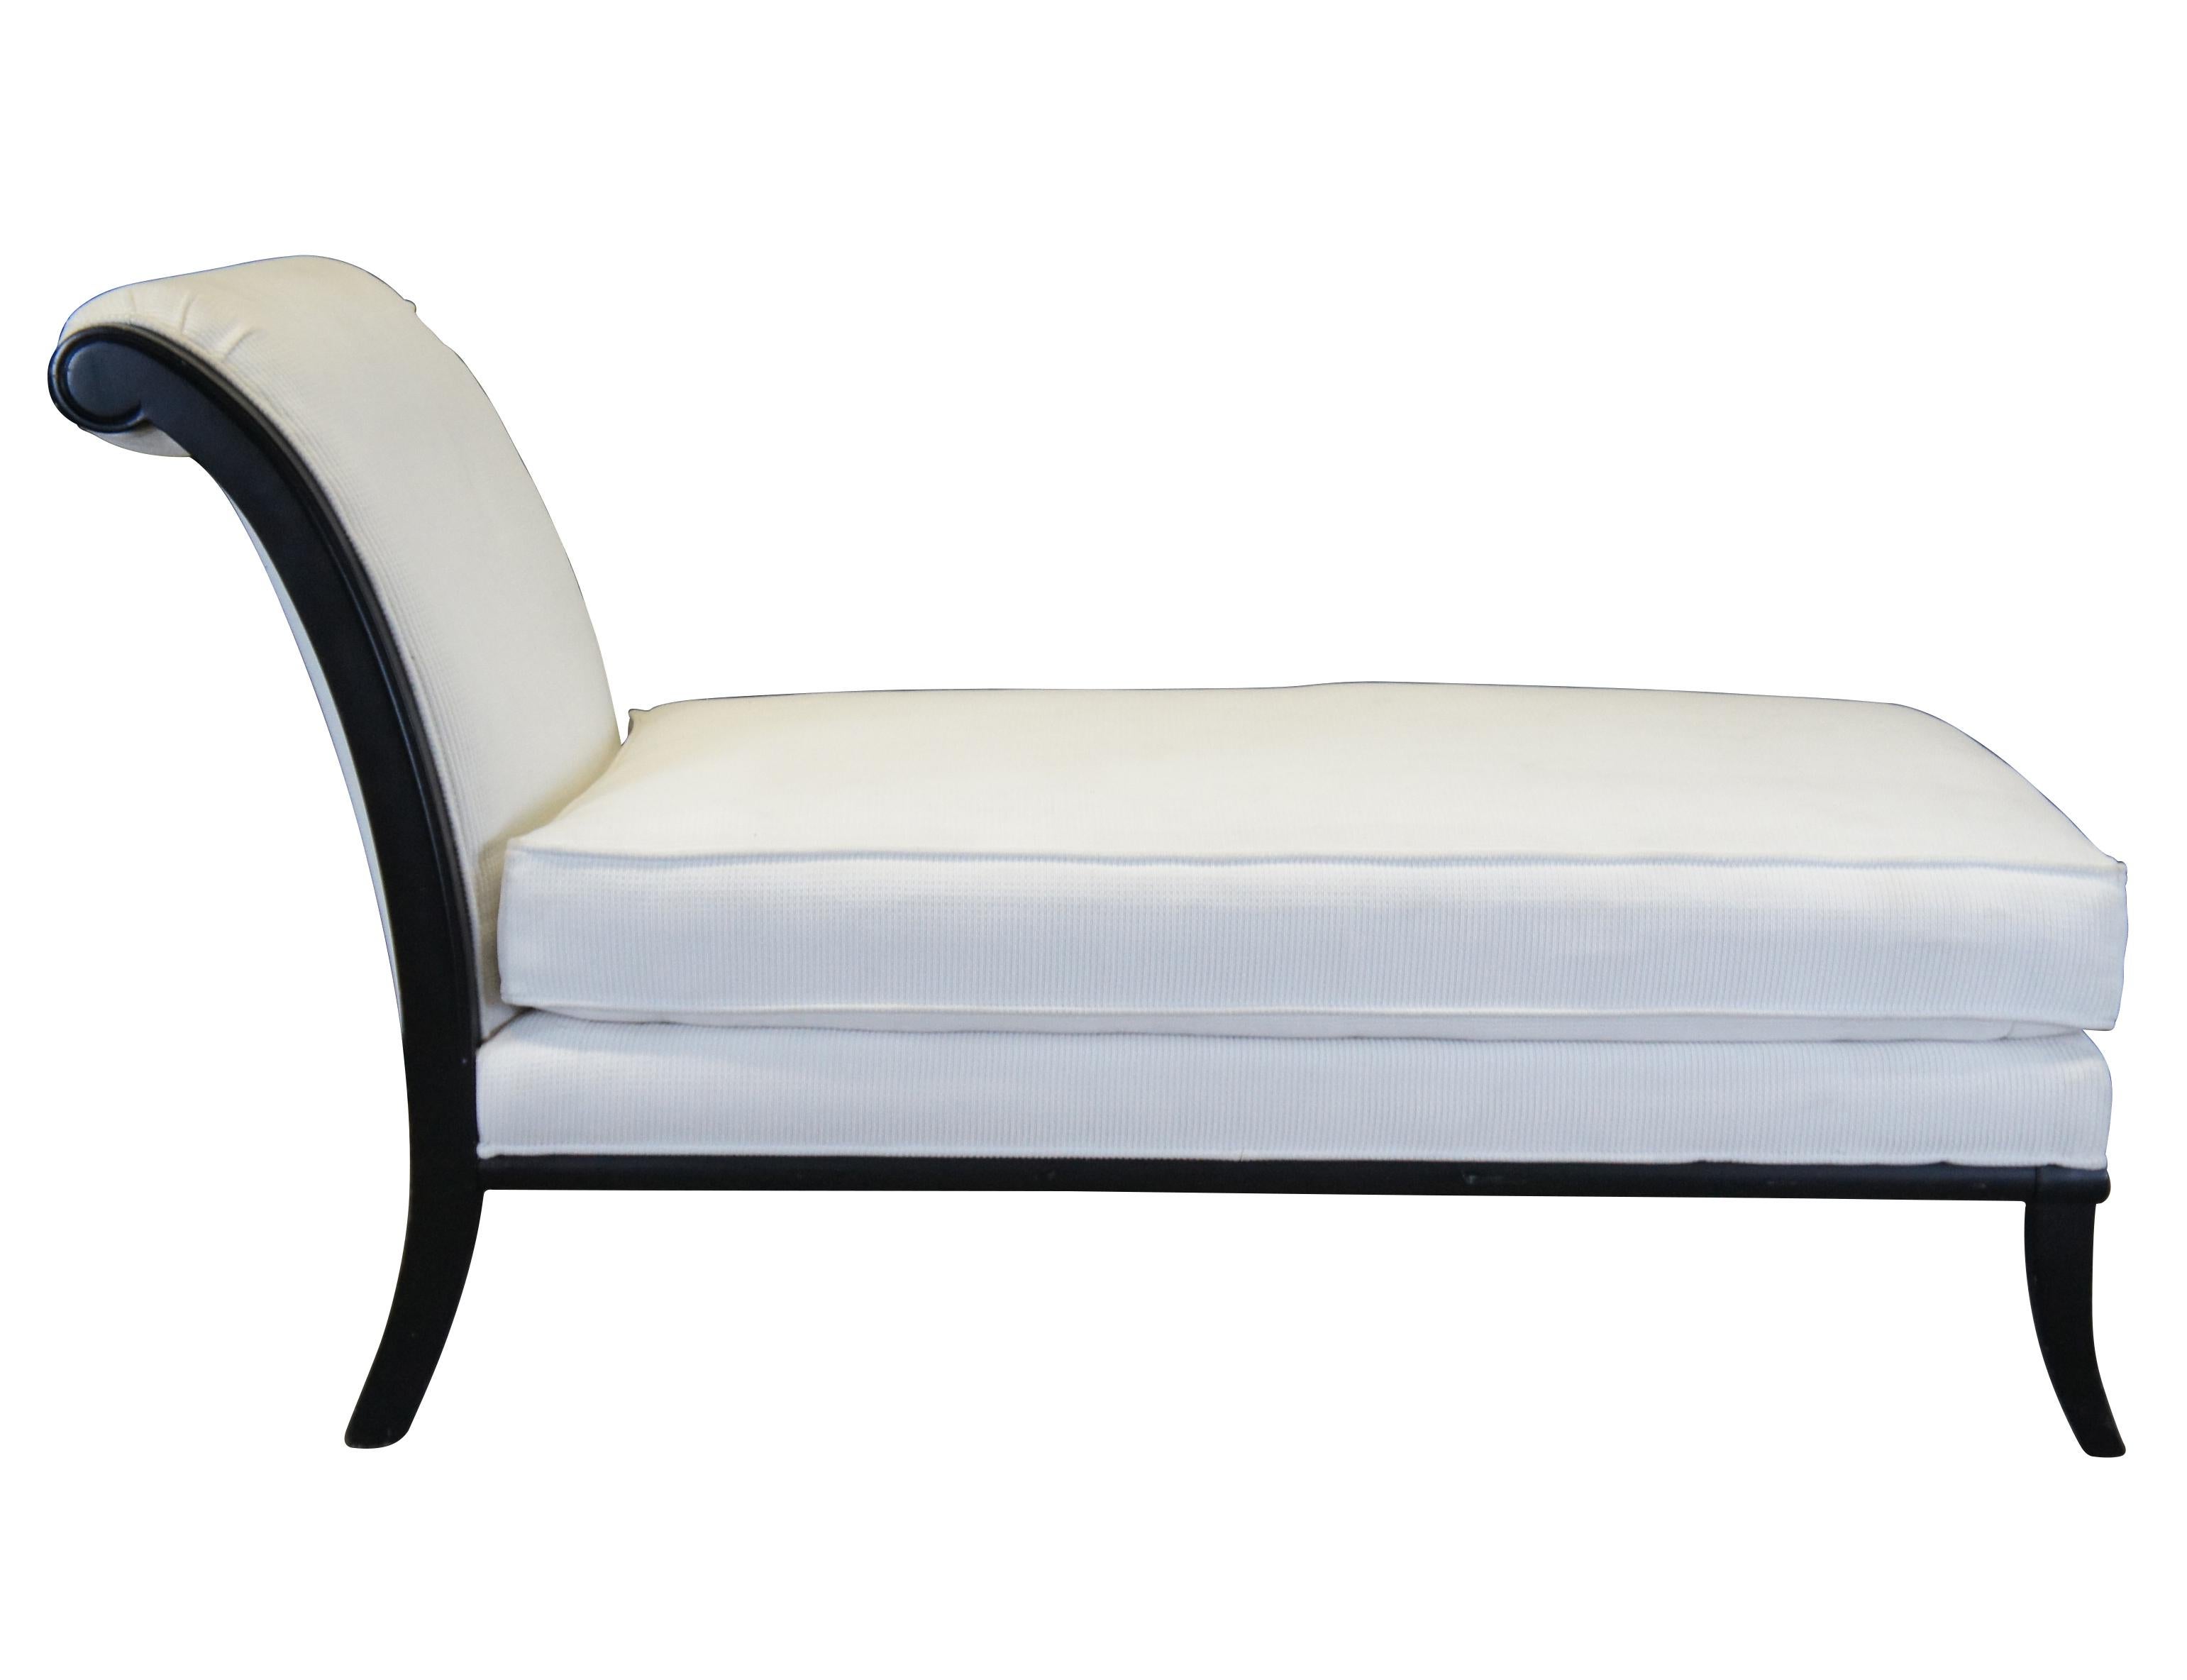 A lovely French inspired chaise lounge by Fairfield, circa 1990s. Features a black frame with a contoured back, white upholstery and saber legs. A comfy addition to any space. Measure: 64